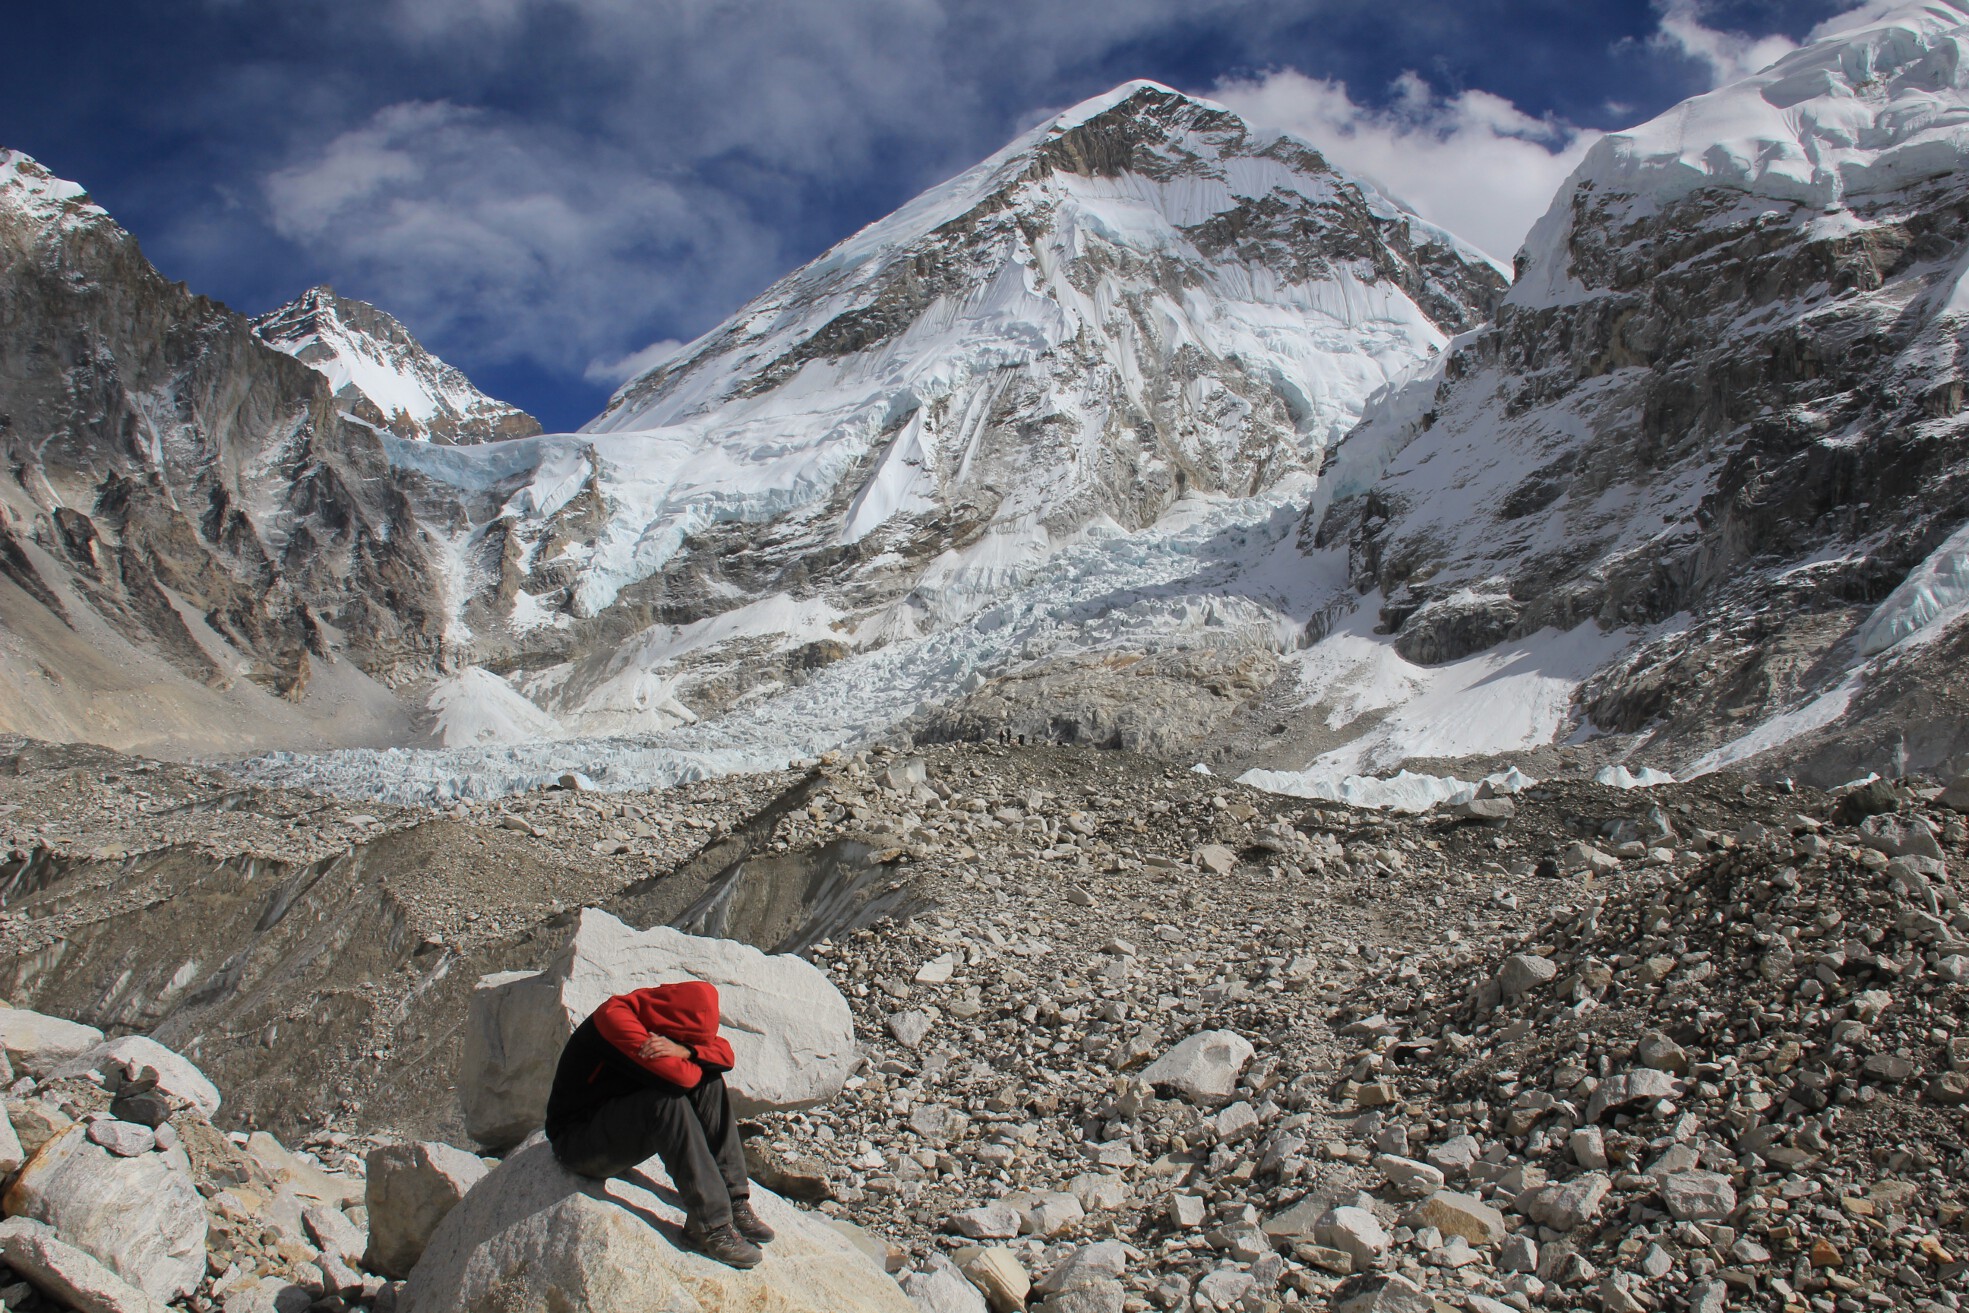 Hank stops to rest while feeling ill on the way to Everest Base Camp.